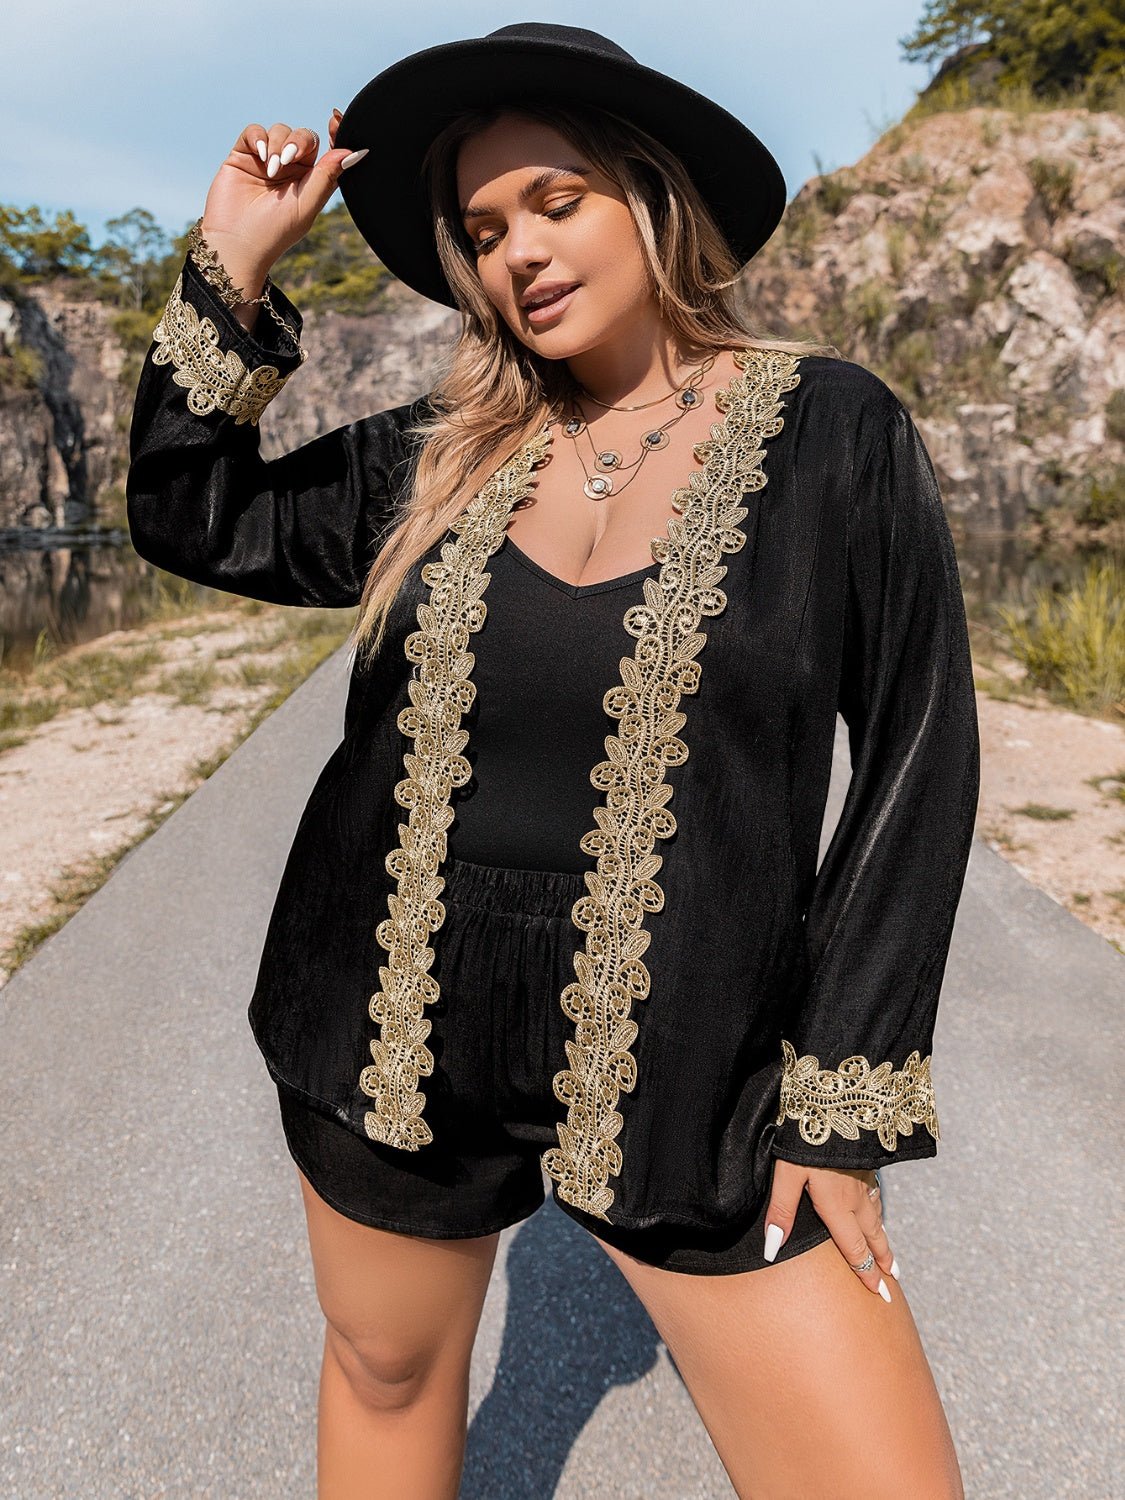 Plus Size Contrast Long Sleeve Top and Shorts Set in BlackShorts SetBeach Rose Co.